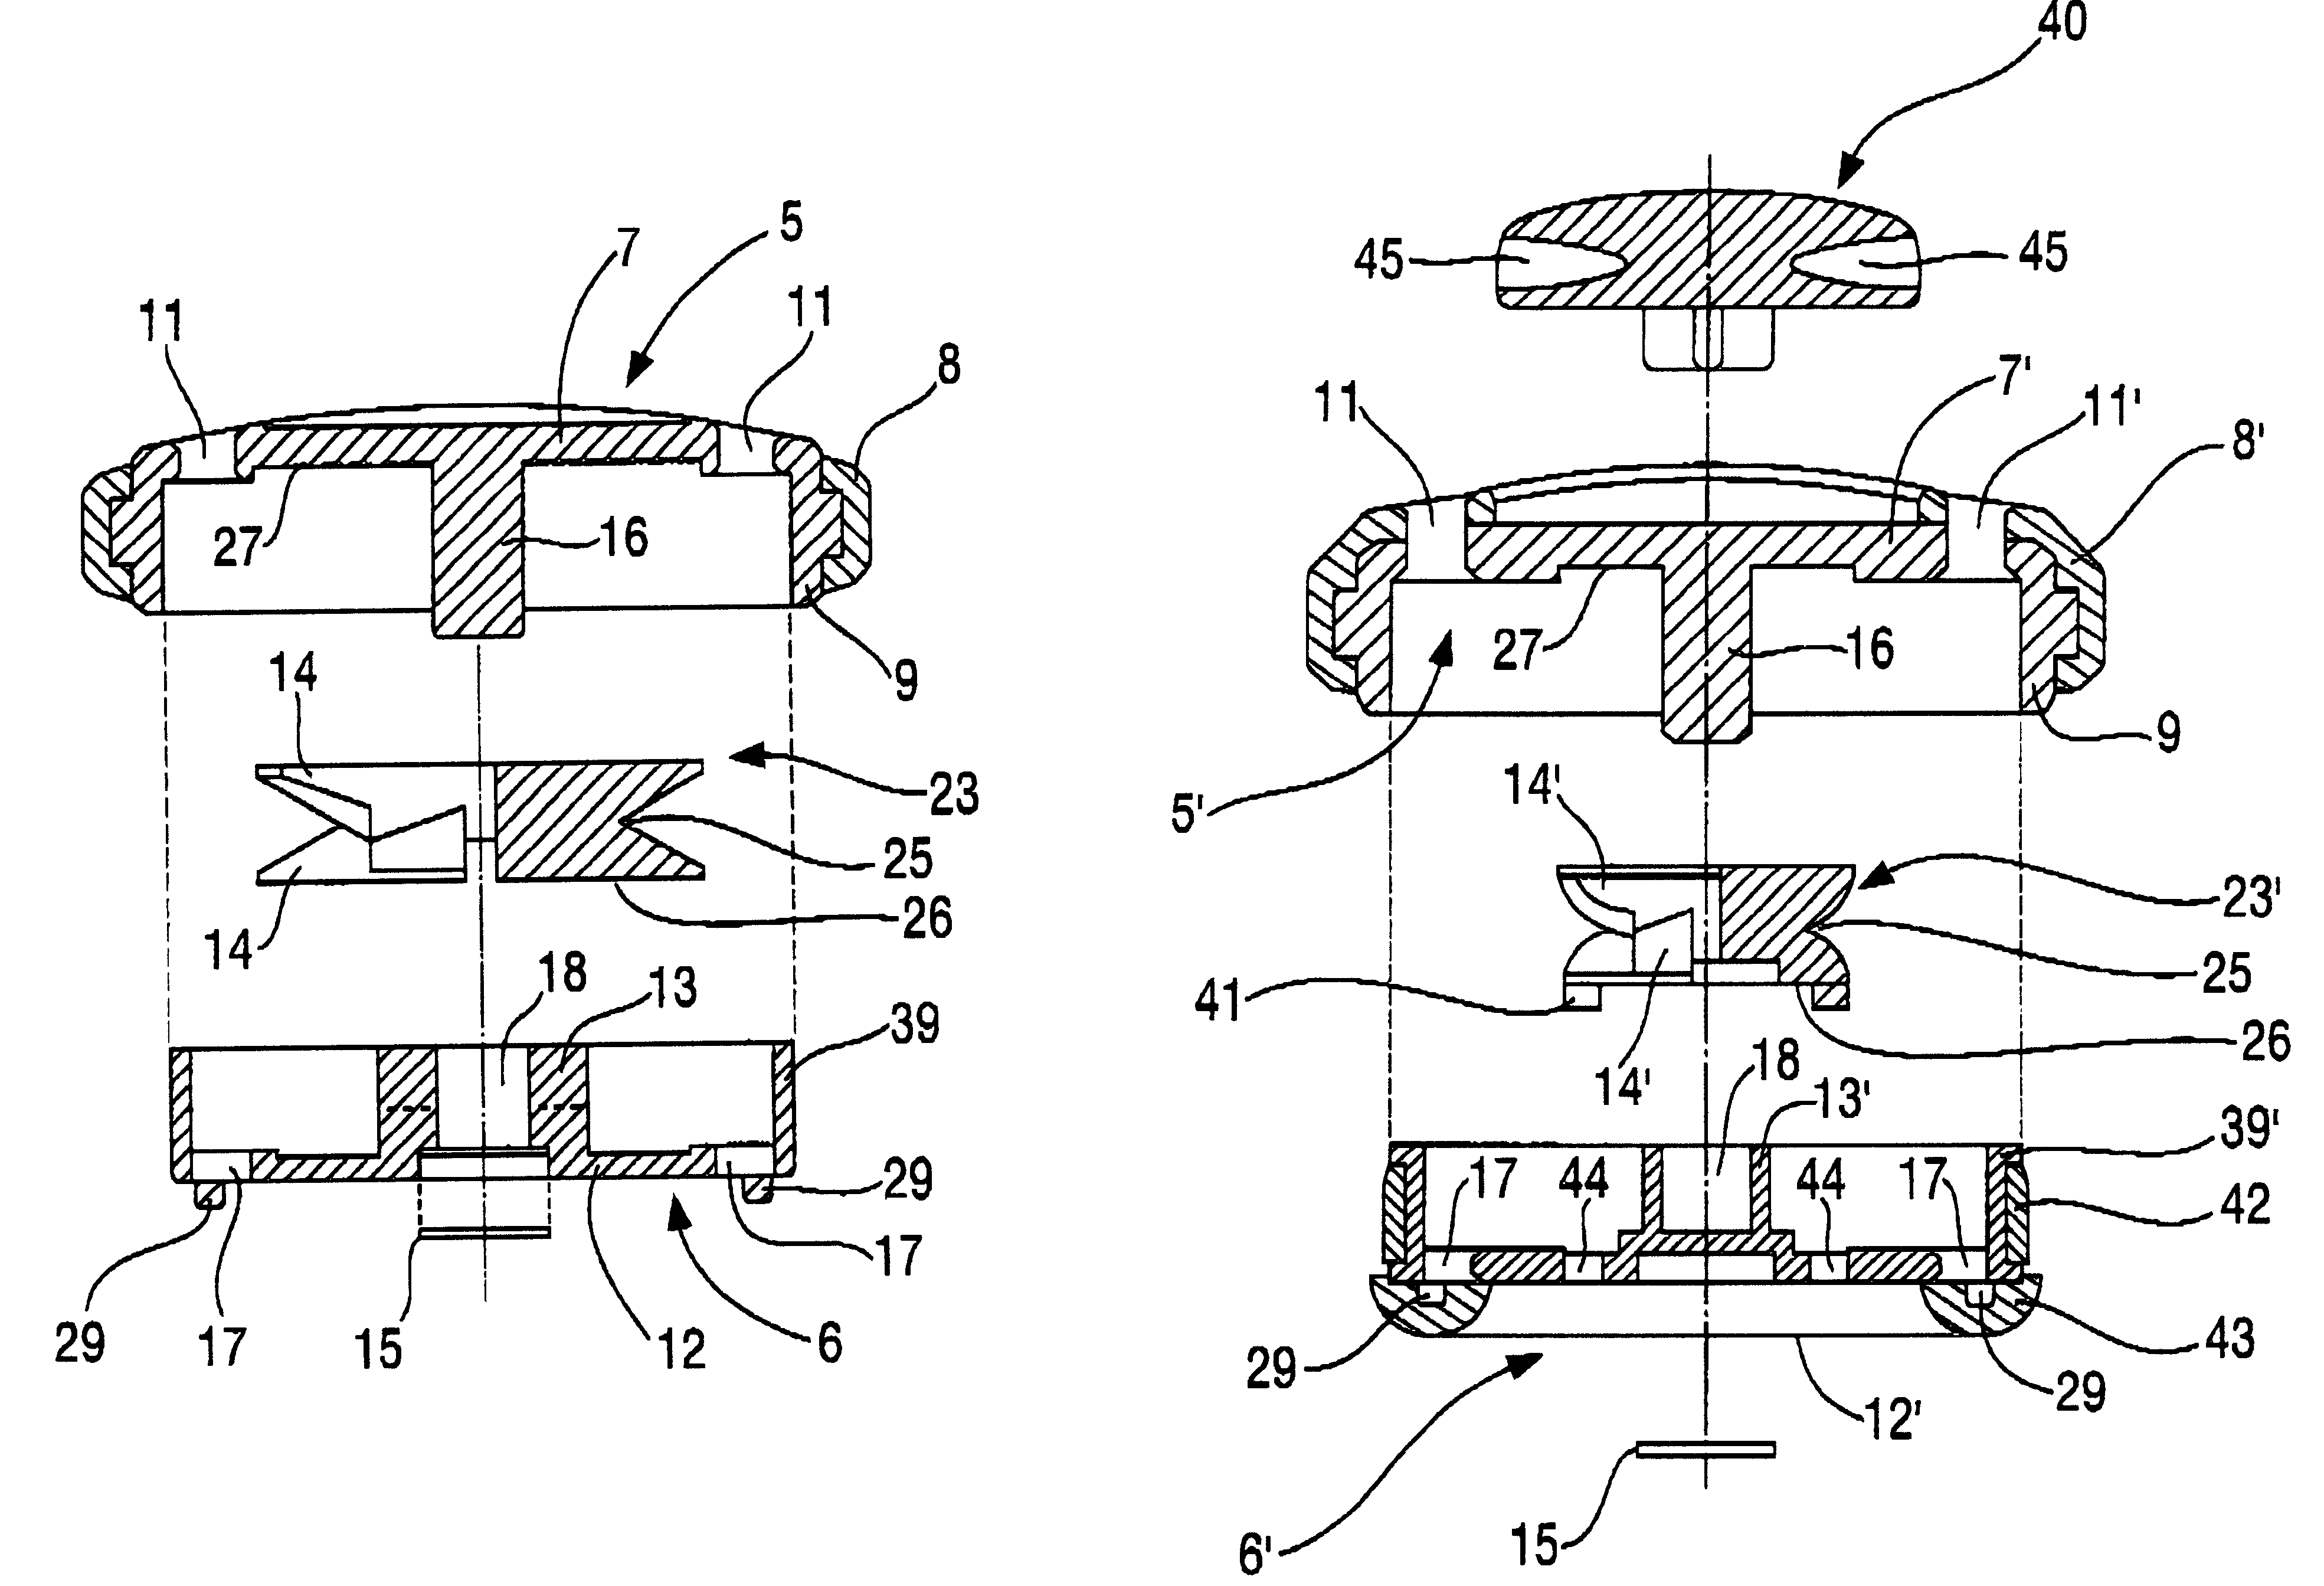 Device for immobilizing the ends shoe laces